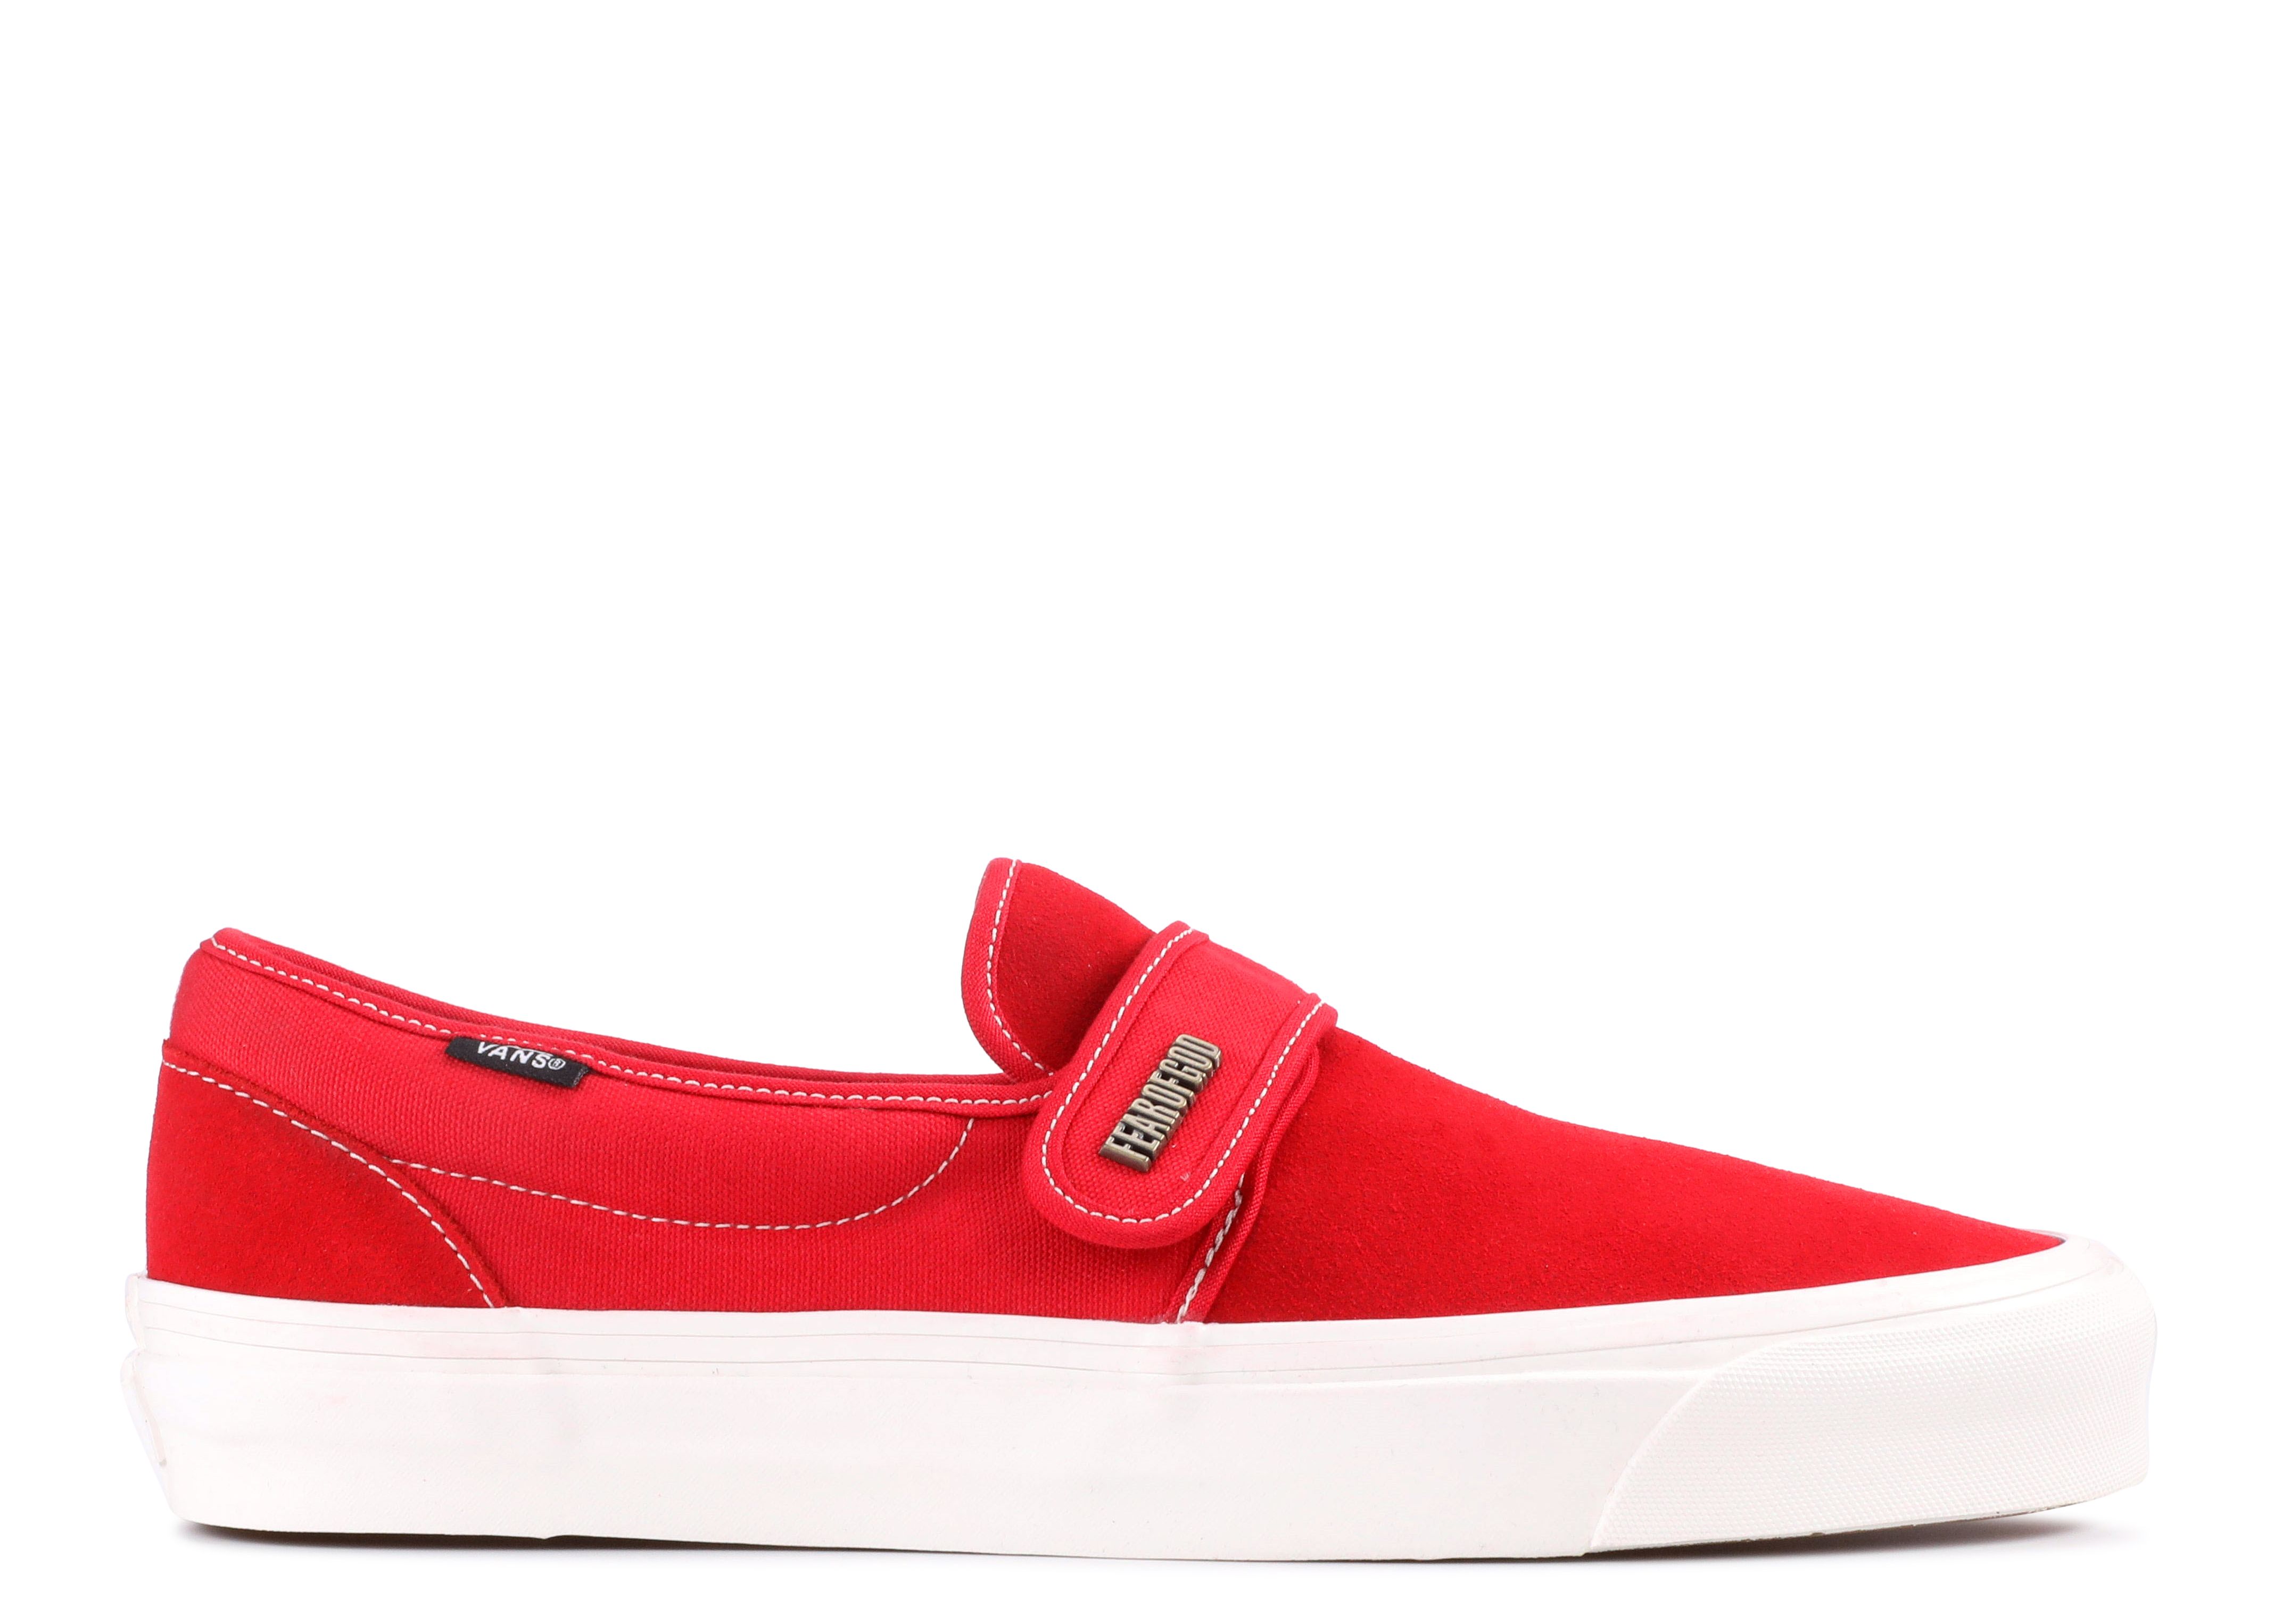 Кроссовки Vans Fear Of God X Slip-On 47 Dx 'Collection 2 Red', красный primal fear the history of fear primal fear